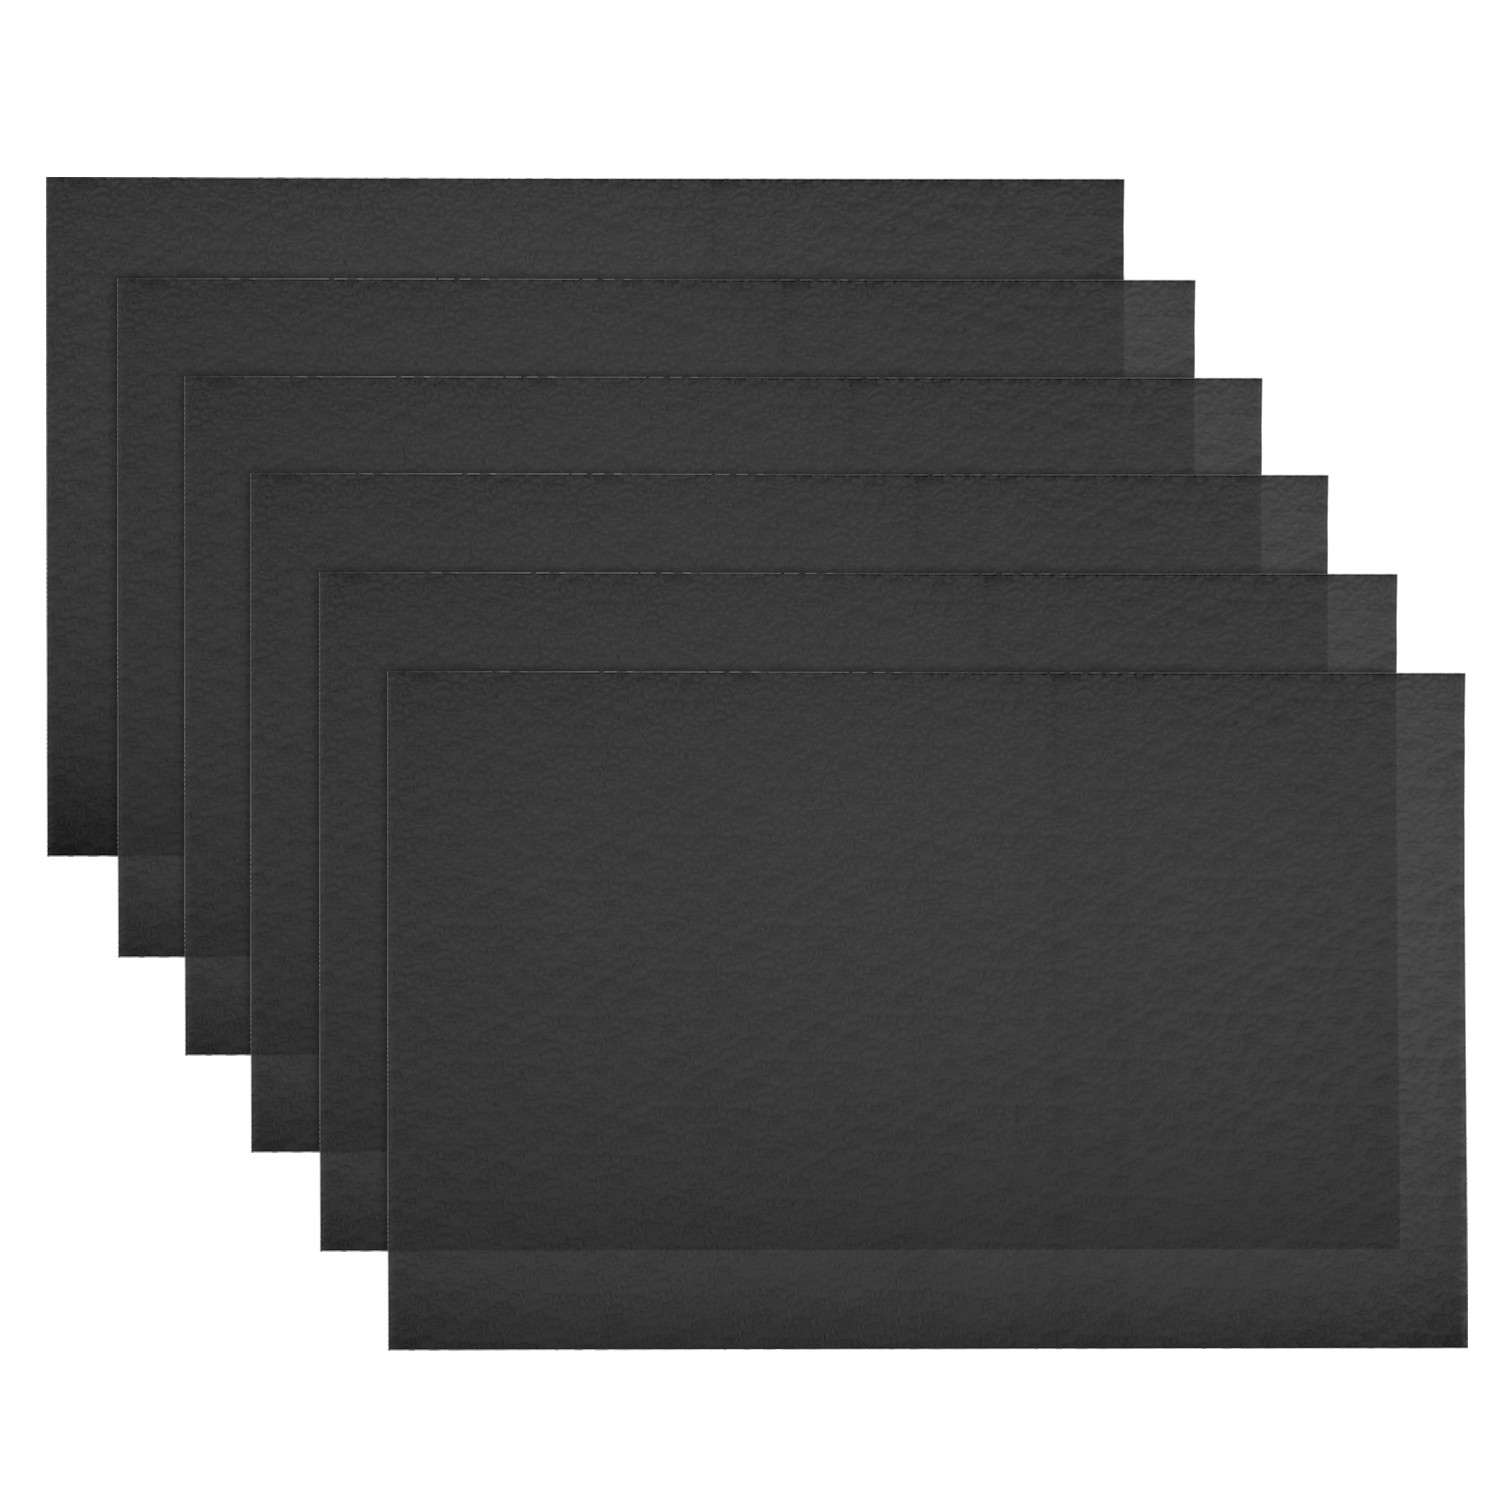 Kuber Industries Fridge Mats|PVC Floral Embossed Refrigerator Drawer Mat|Waterproof & Stain Resistant Fridge Mat Perfect for Home & Kitchen|Set of 6 (Gray)